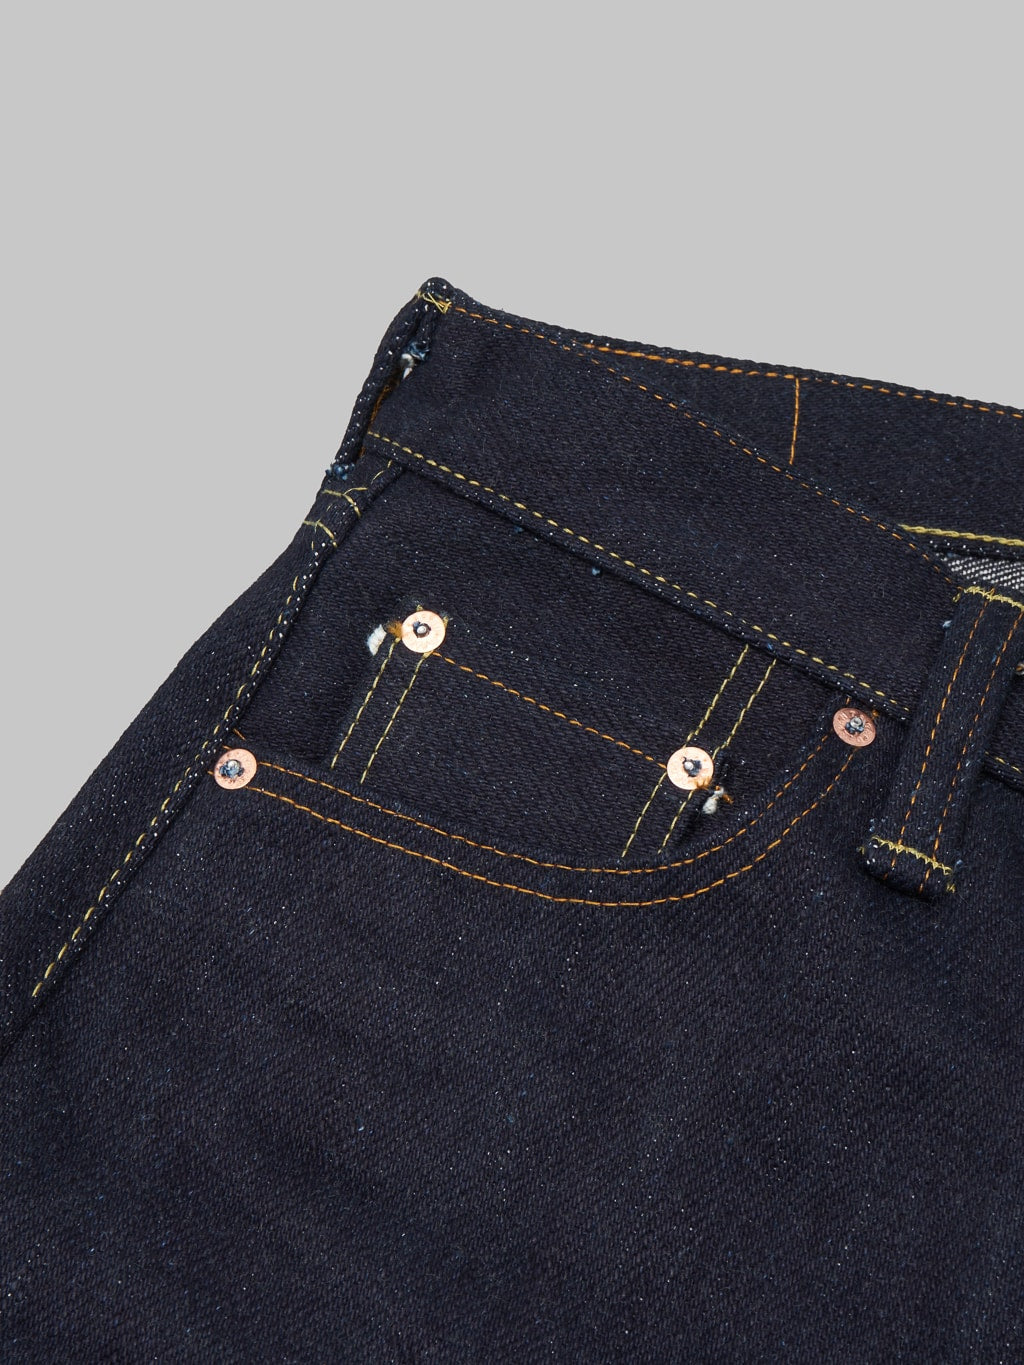 The Strike Gold Extra Heavyweight regular straight jeans coin pocket